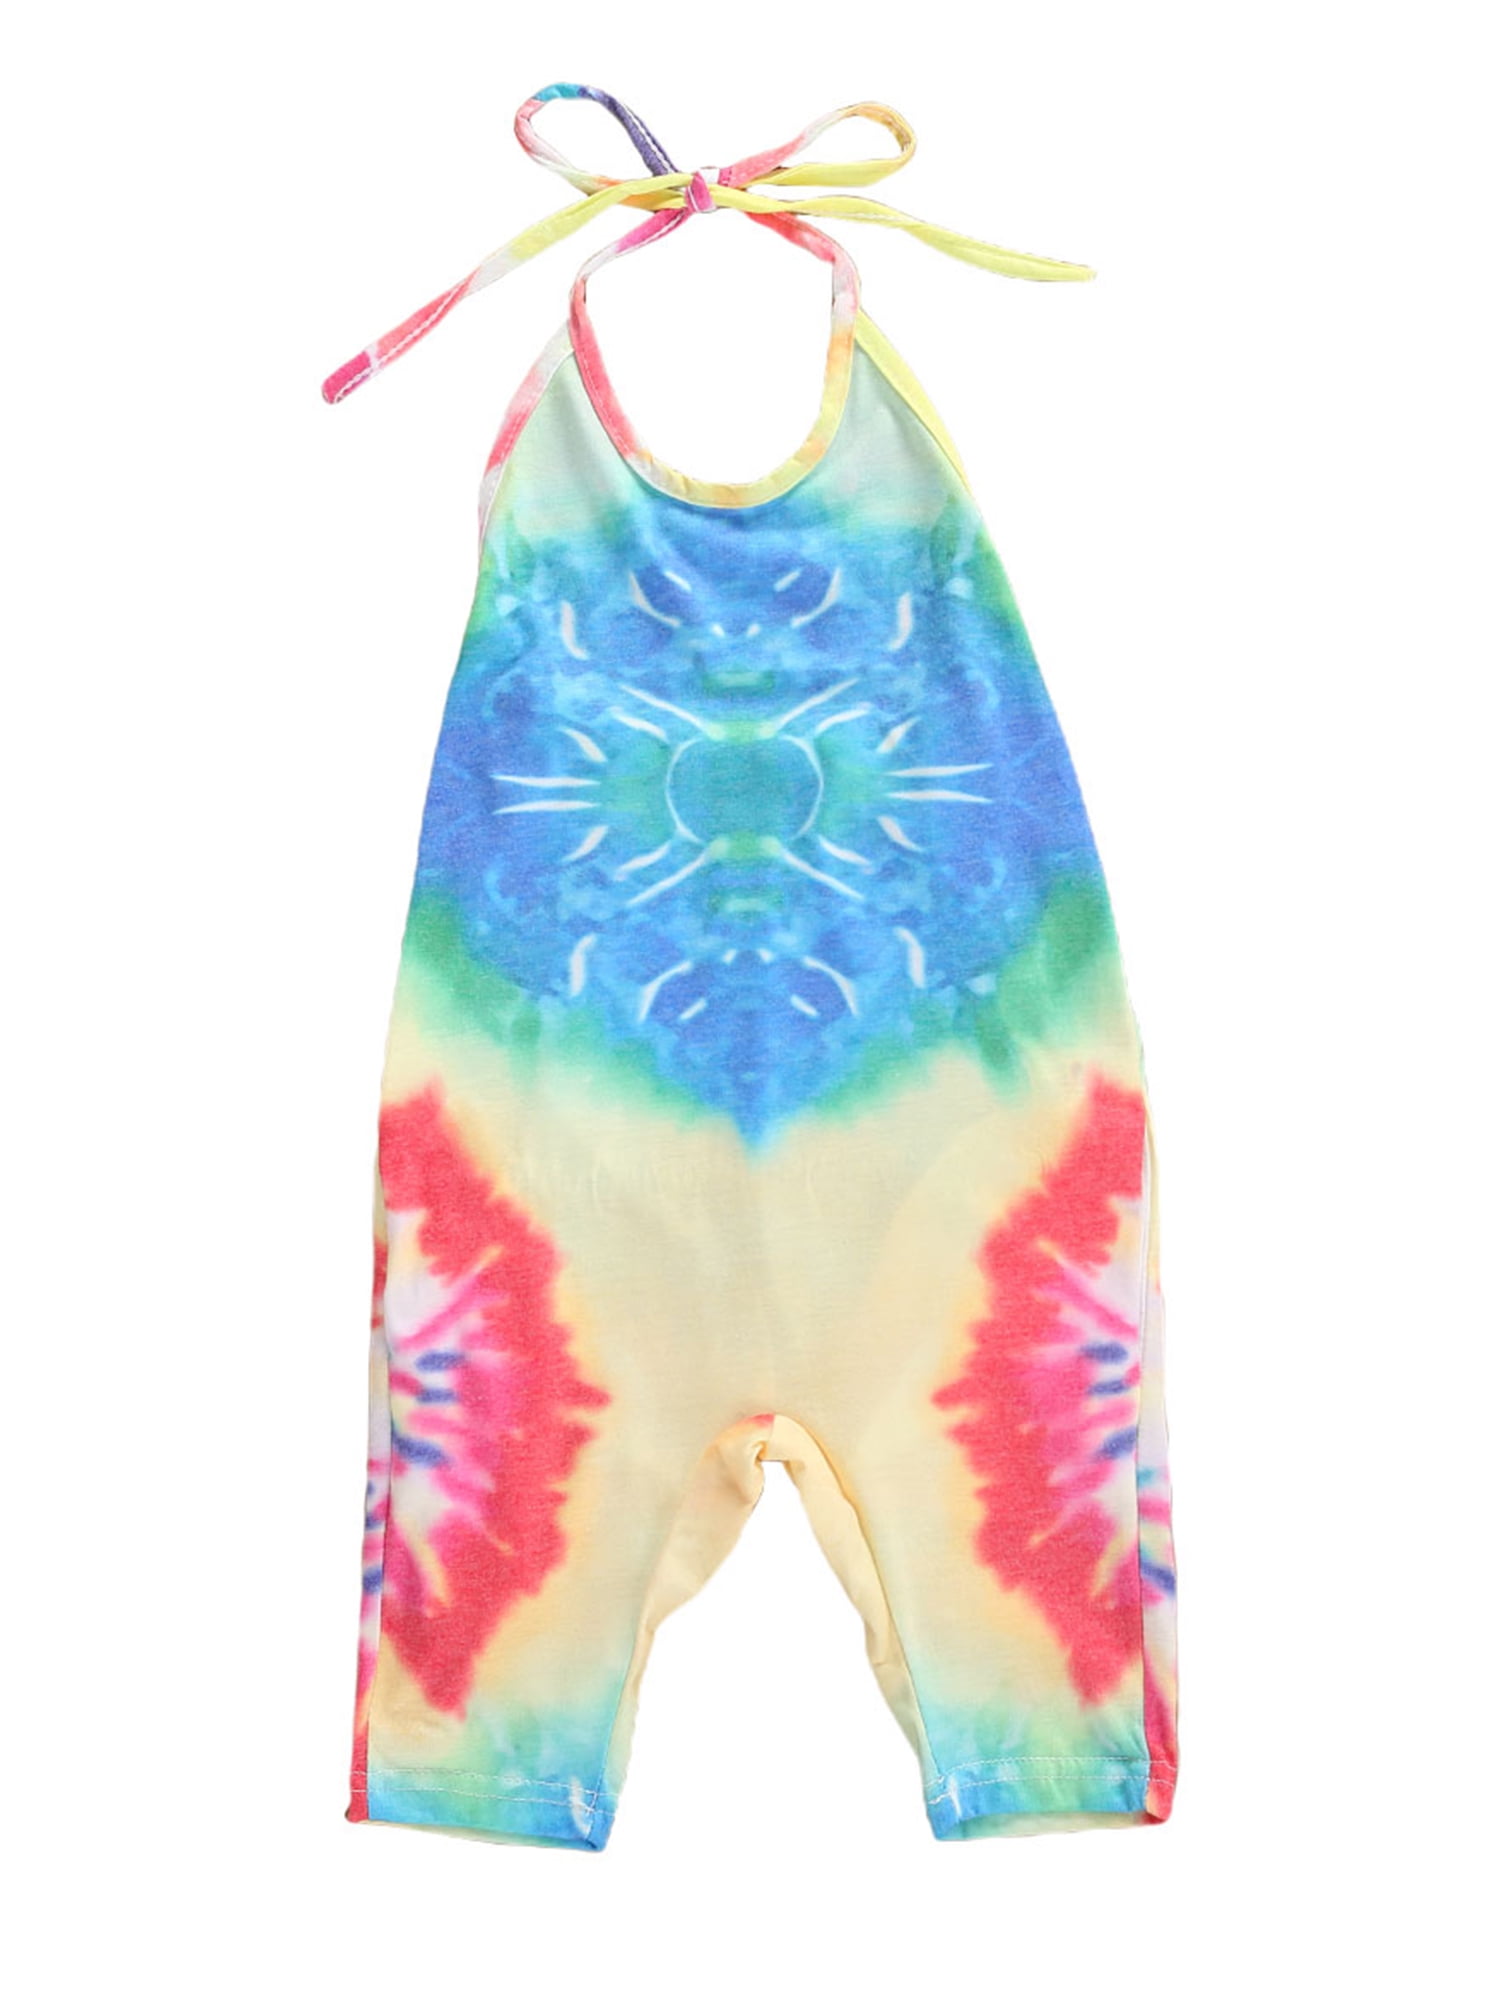 Kids Girls Beautiful Tie &Dye Outfit Playsuits Jumpsuits Romper Summer Dress Top